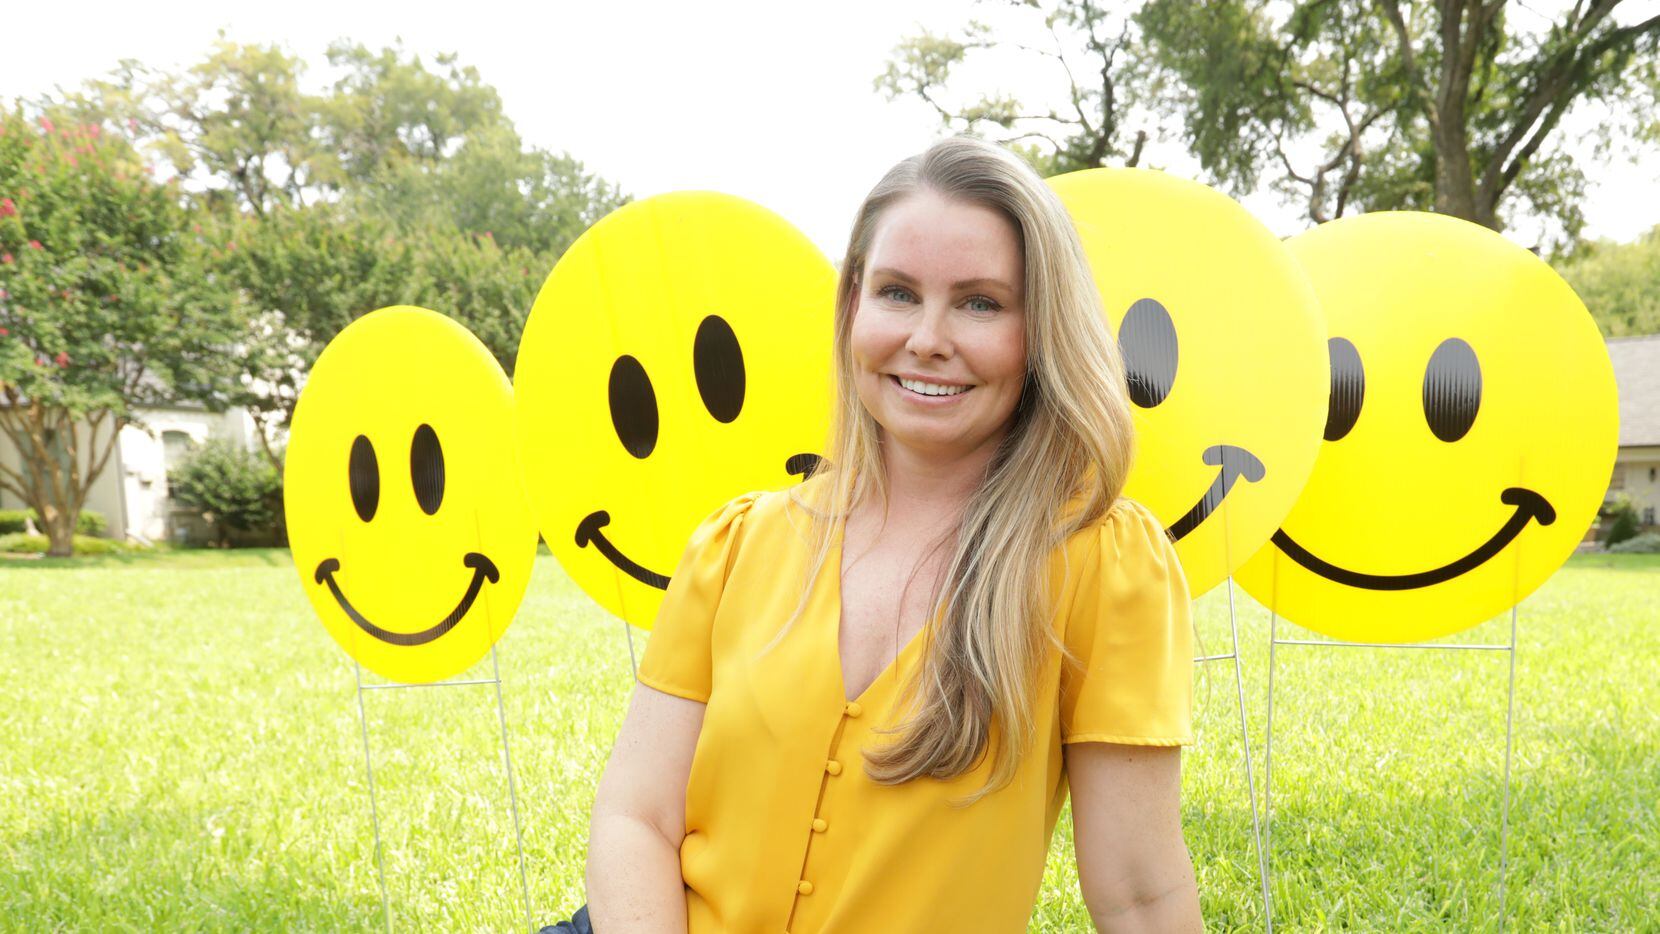 Chelsea Davenport of Richardson got the pick-me-up she needed from a smiley-face sign near a friend’s yard. The sign reminded her of her father, who had recently died, so she brought a bevy of smiley faces to his memorial service.